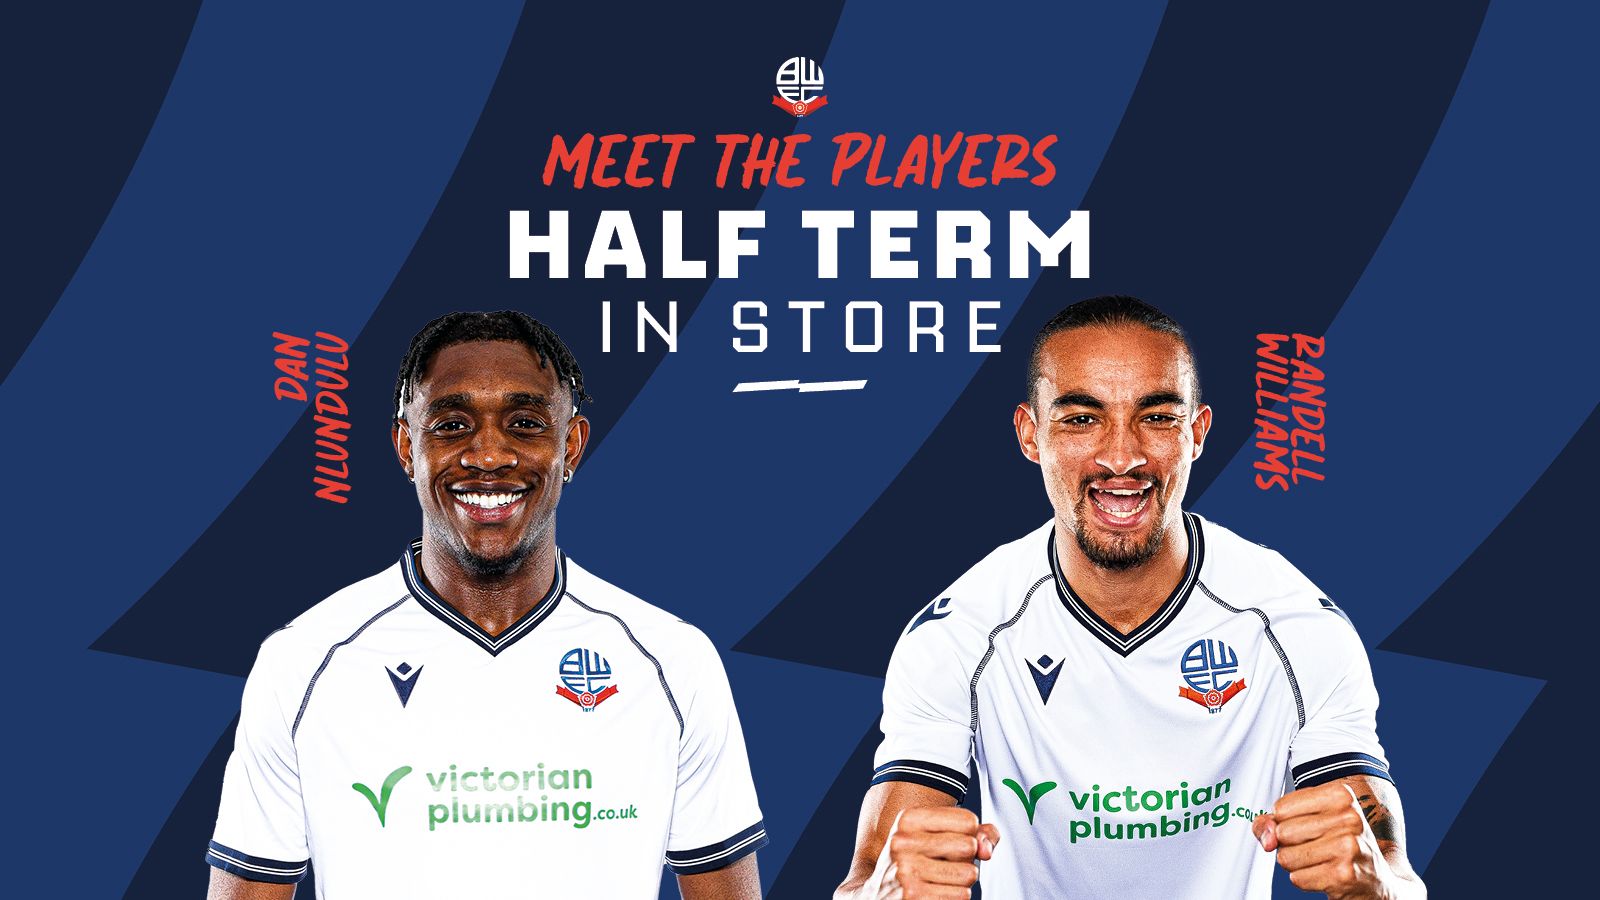 Meet the players